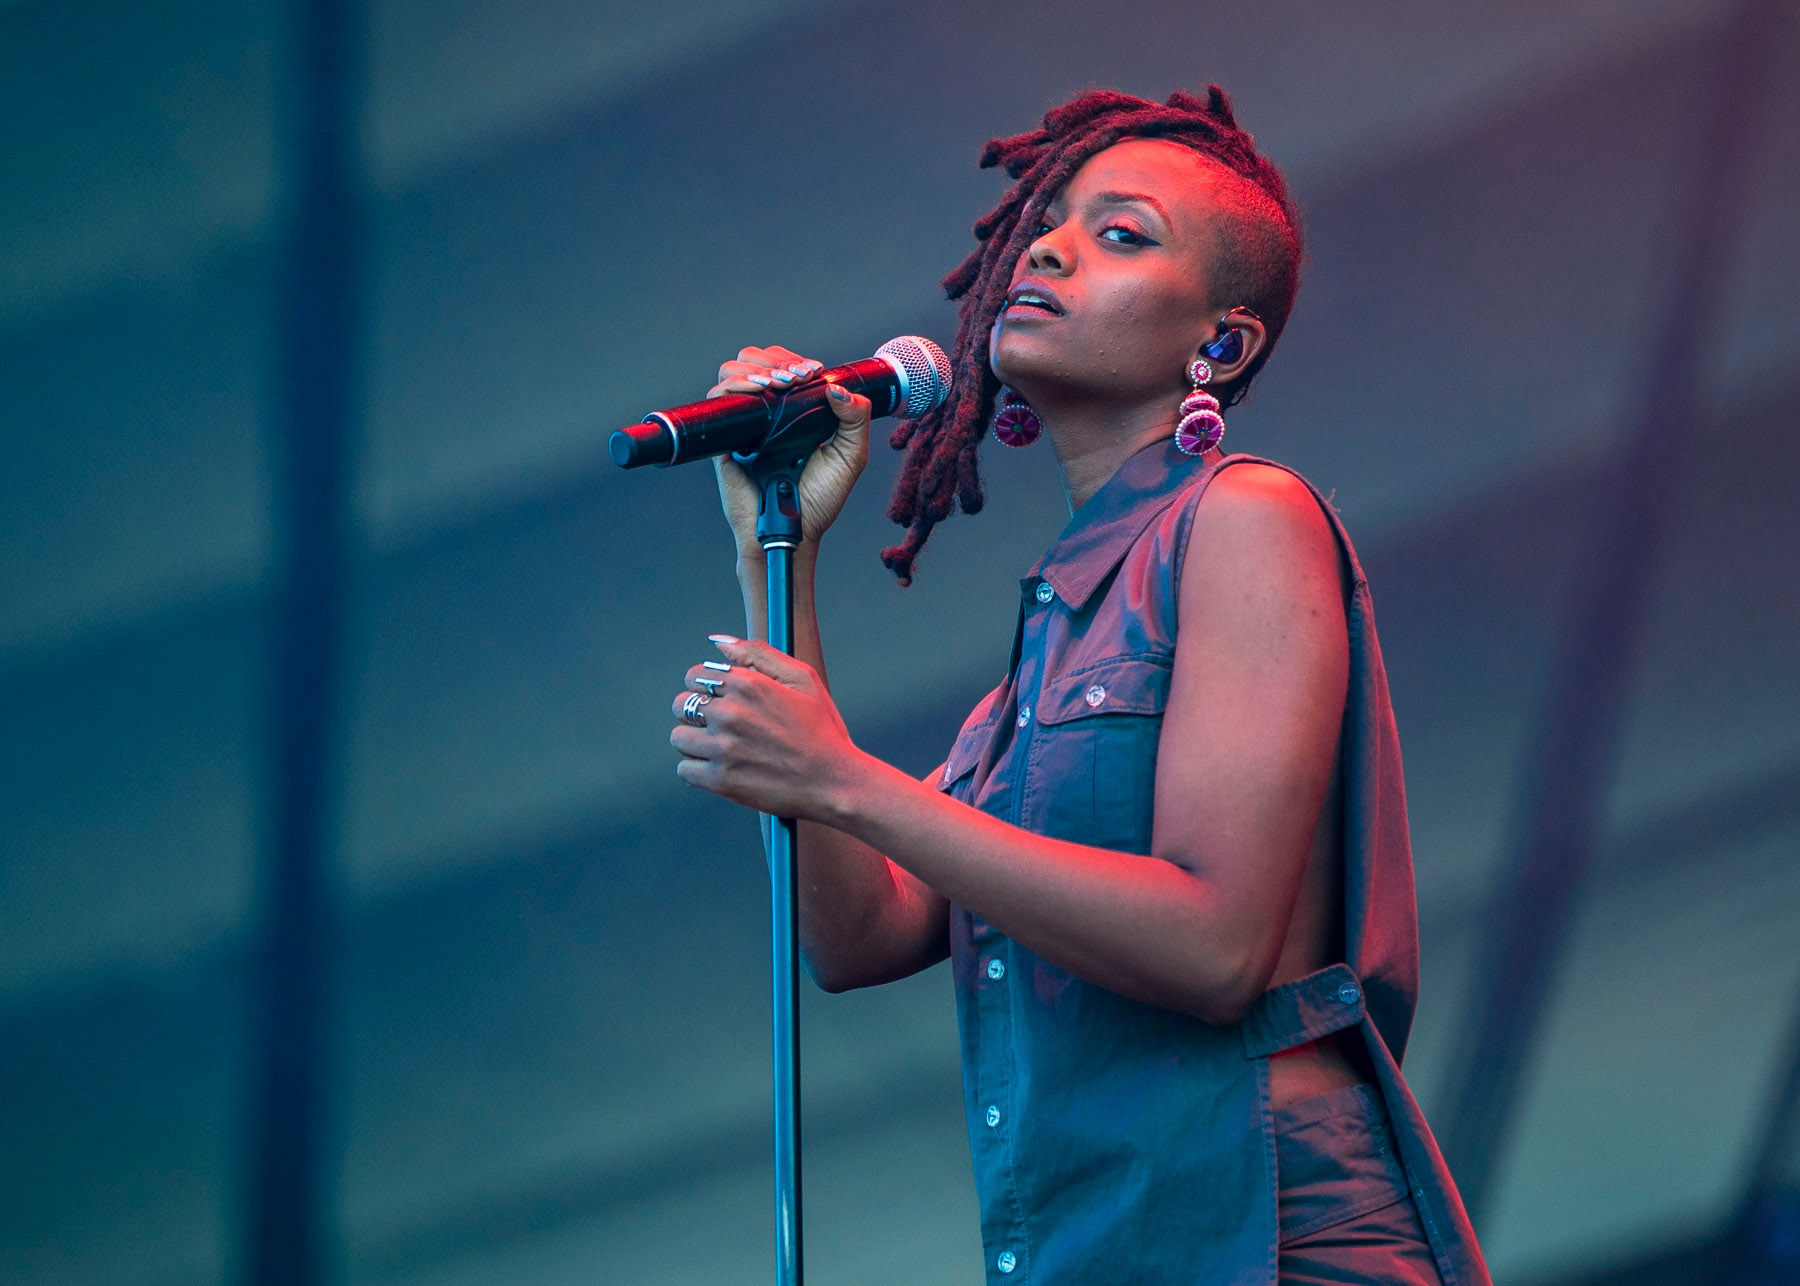 QUEBEC CITY, QC - JULY 15:  Kelela performs on July 15, 2017 in Quebec City, Canada.  (Photo by Scott Legato/Getty Images) (Scott Legato&mdash;Getty Images)